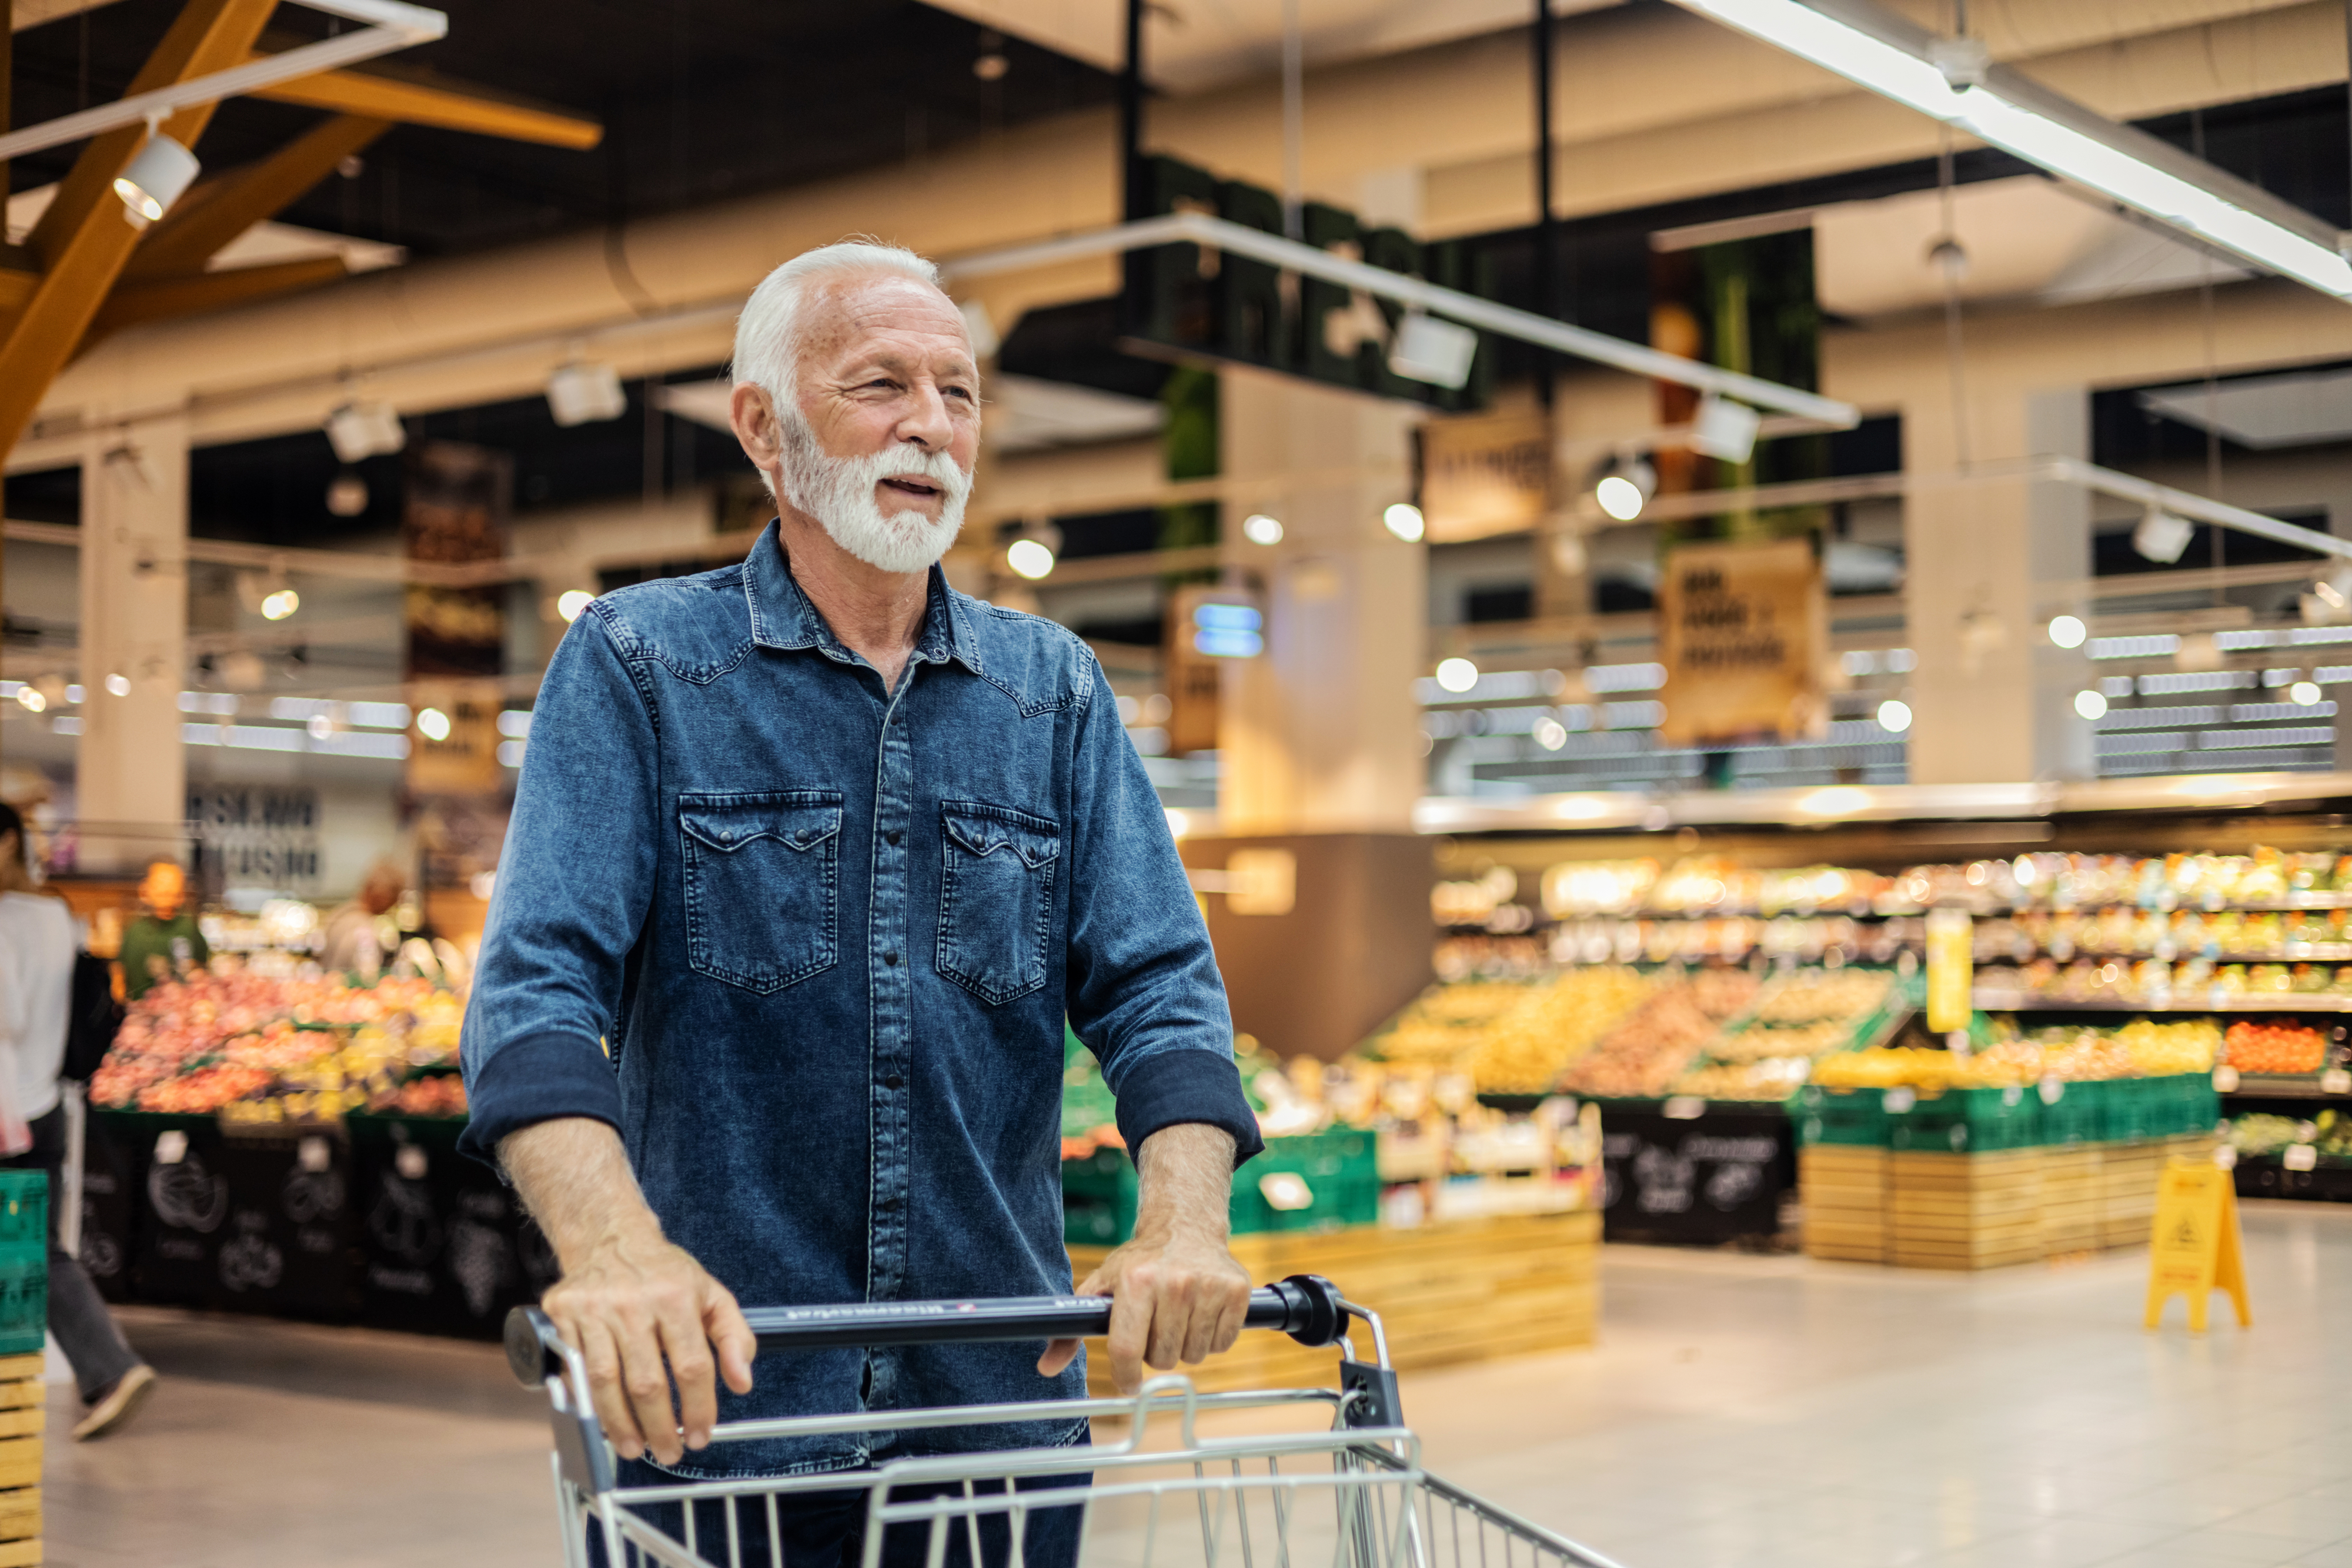 Elderly man with beard shopping with a cart in a grocery store